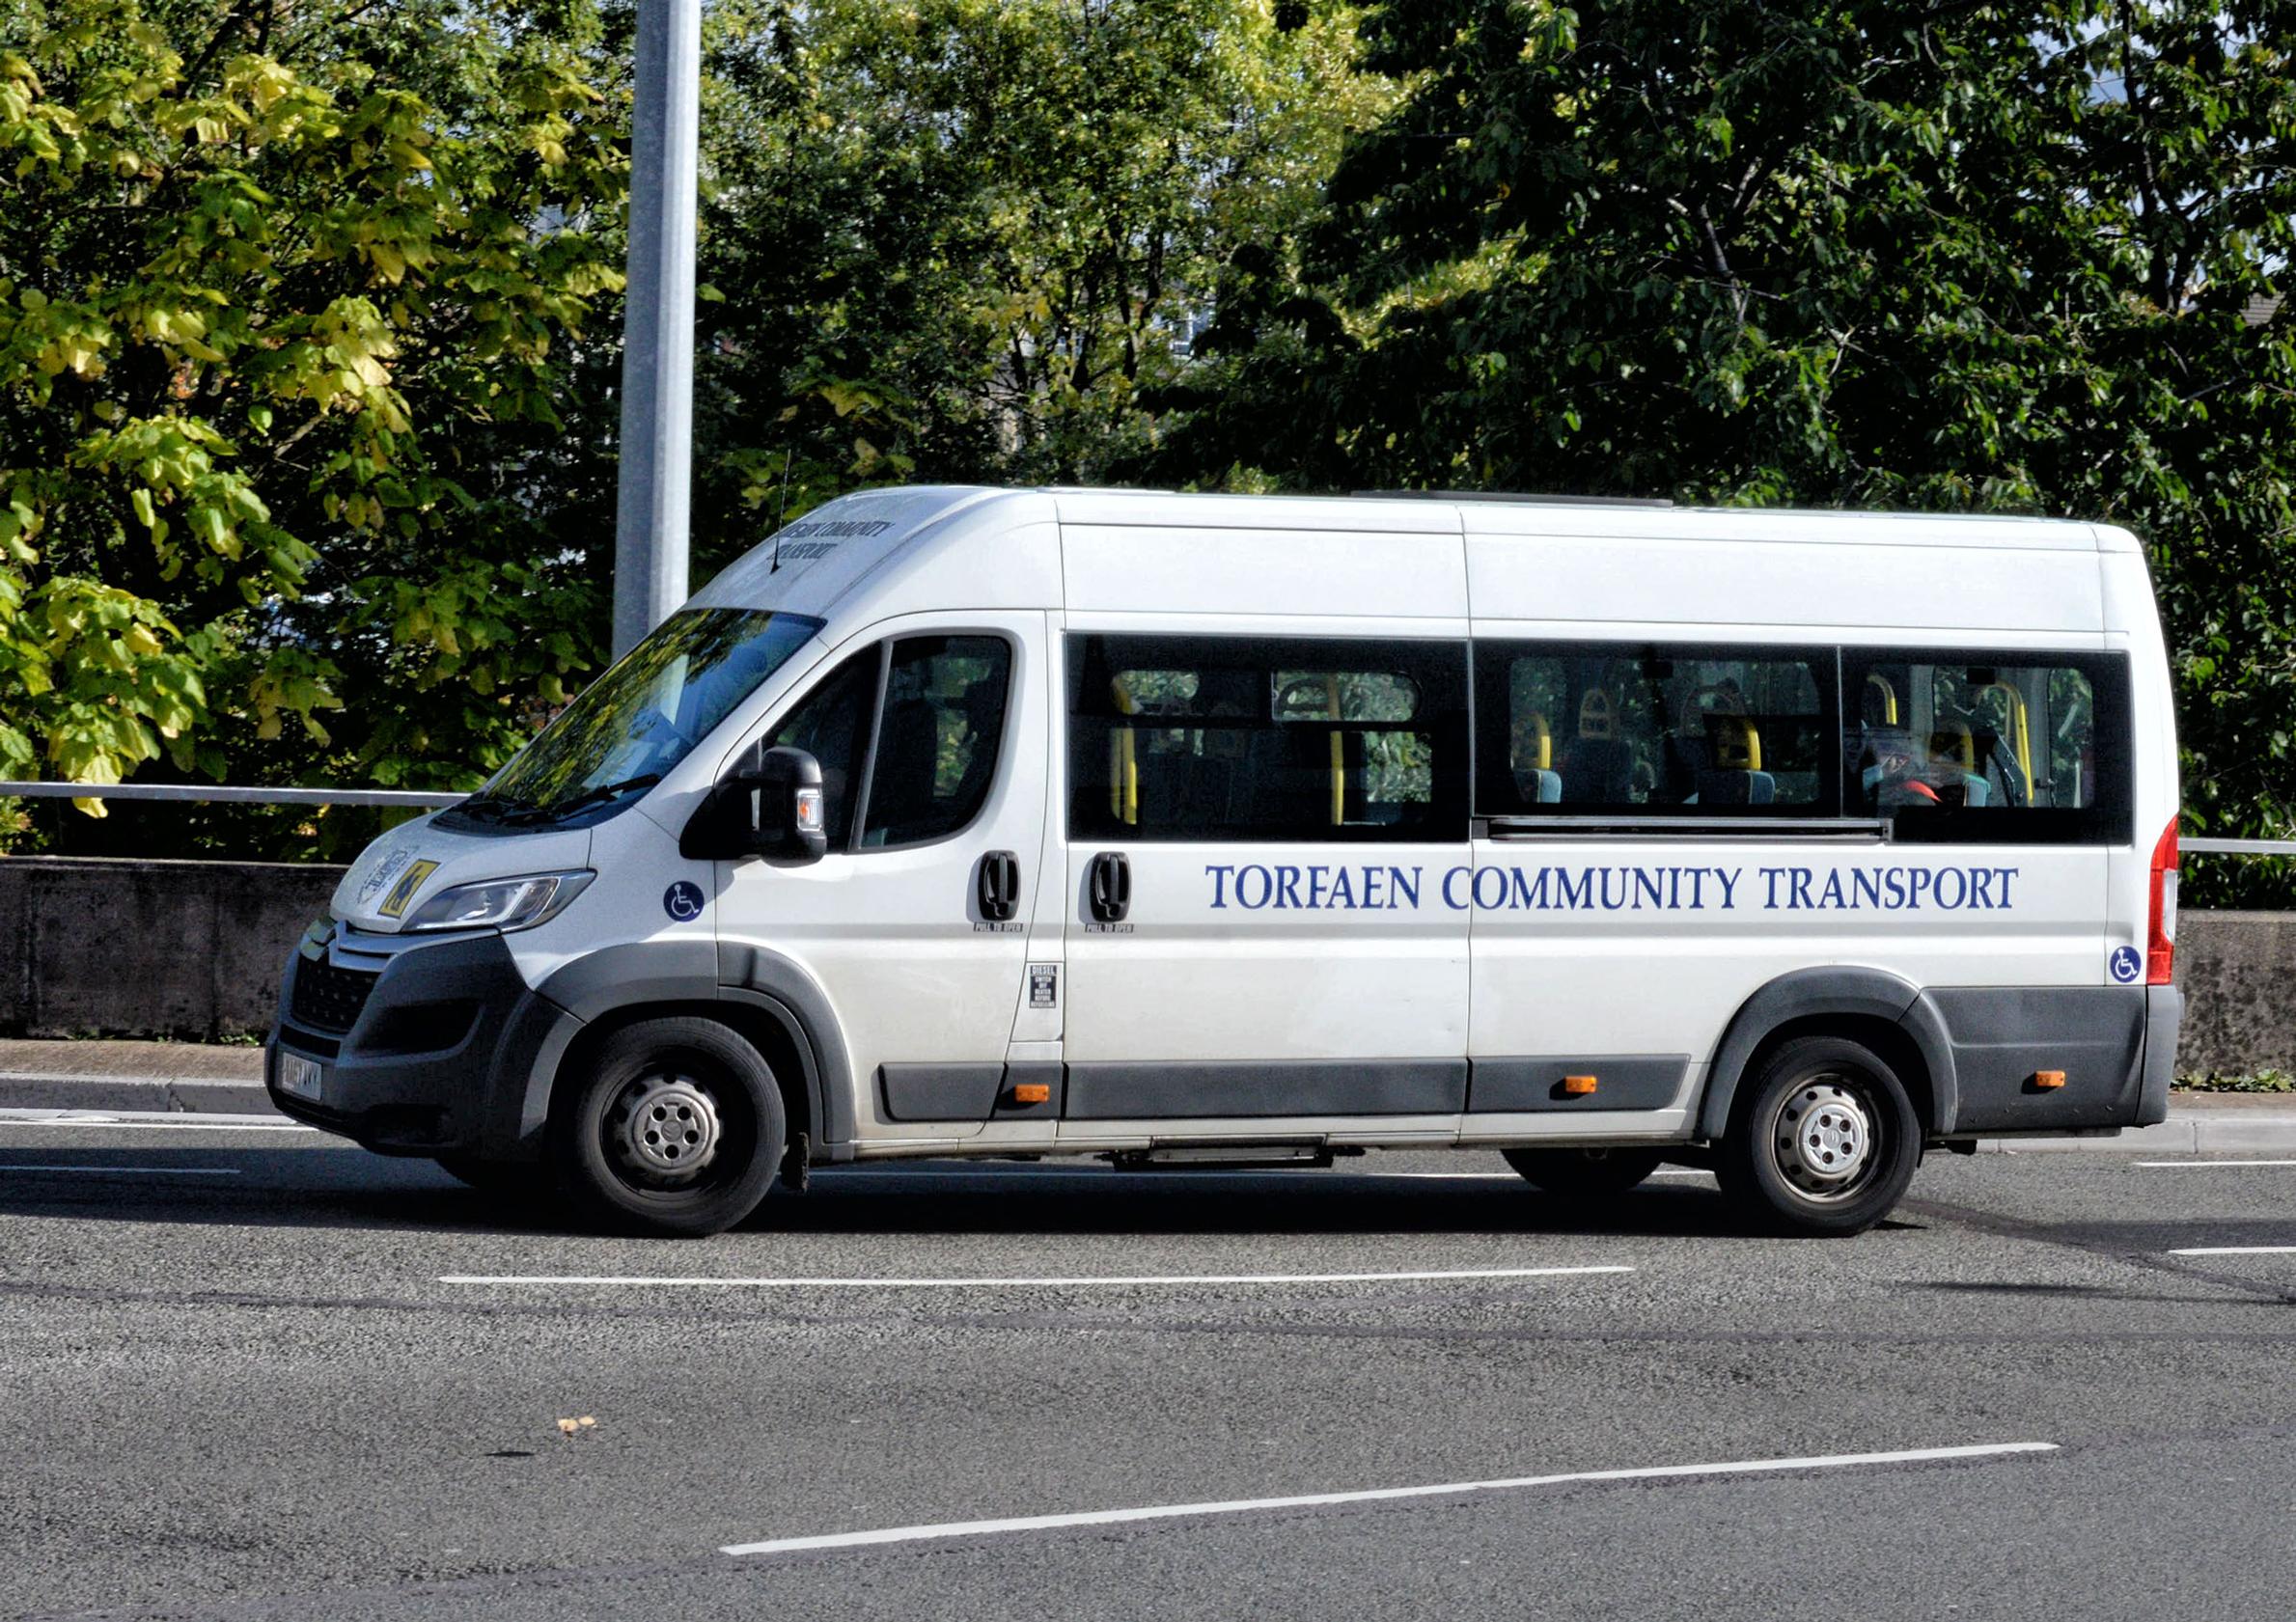 Concessionary passengers feel safer on community buses